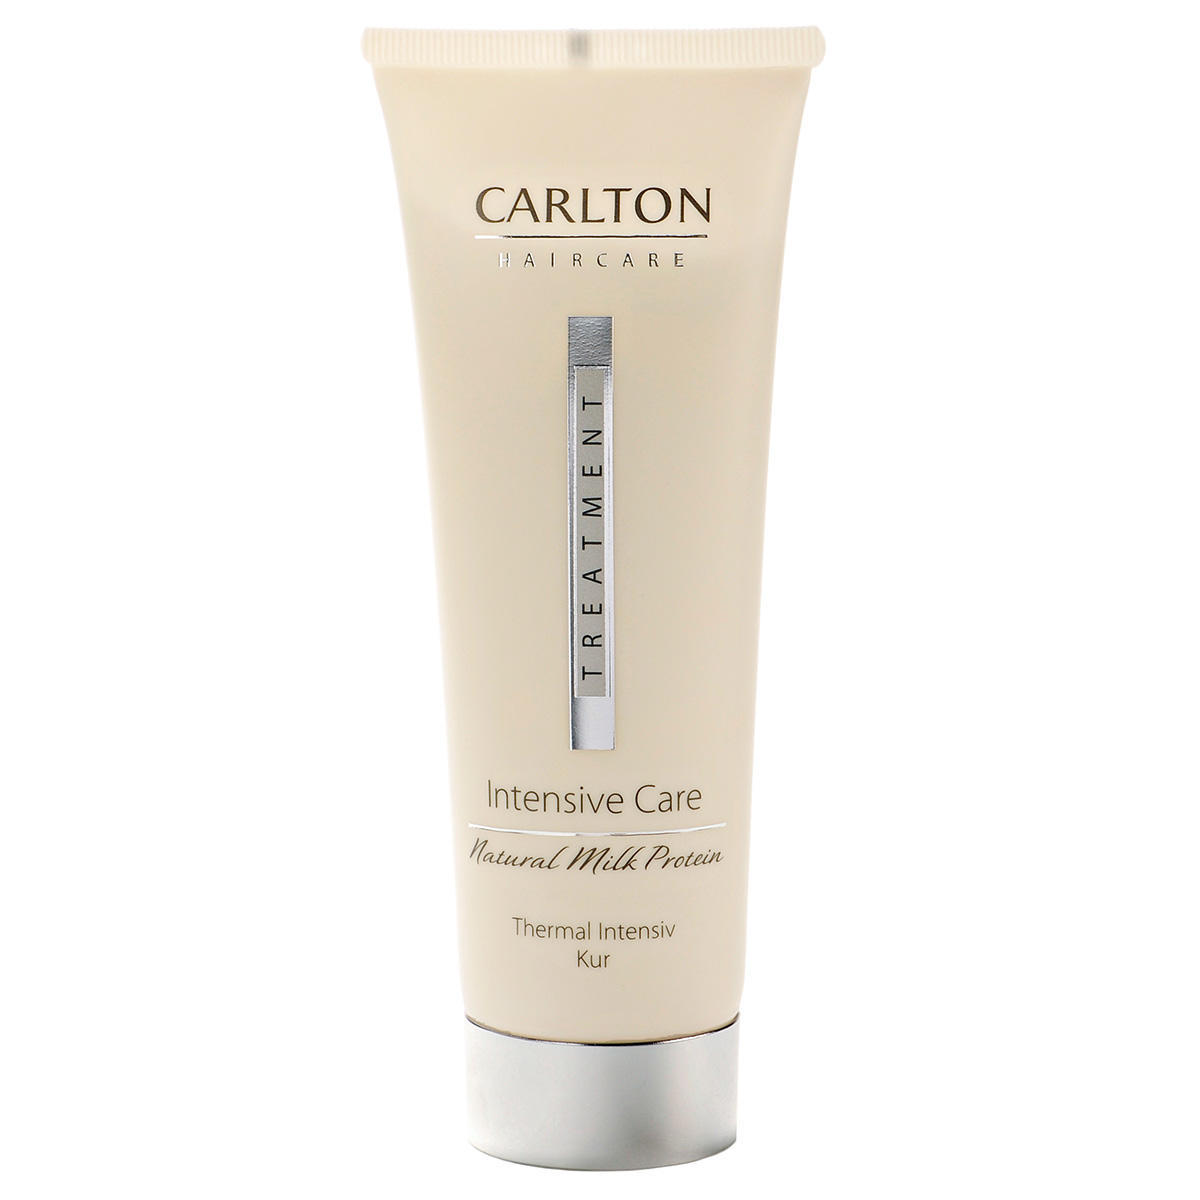 CARLTON Intensive Care Cure thermale intensive 125 ml - 1